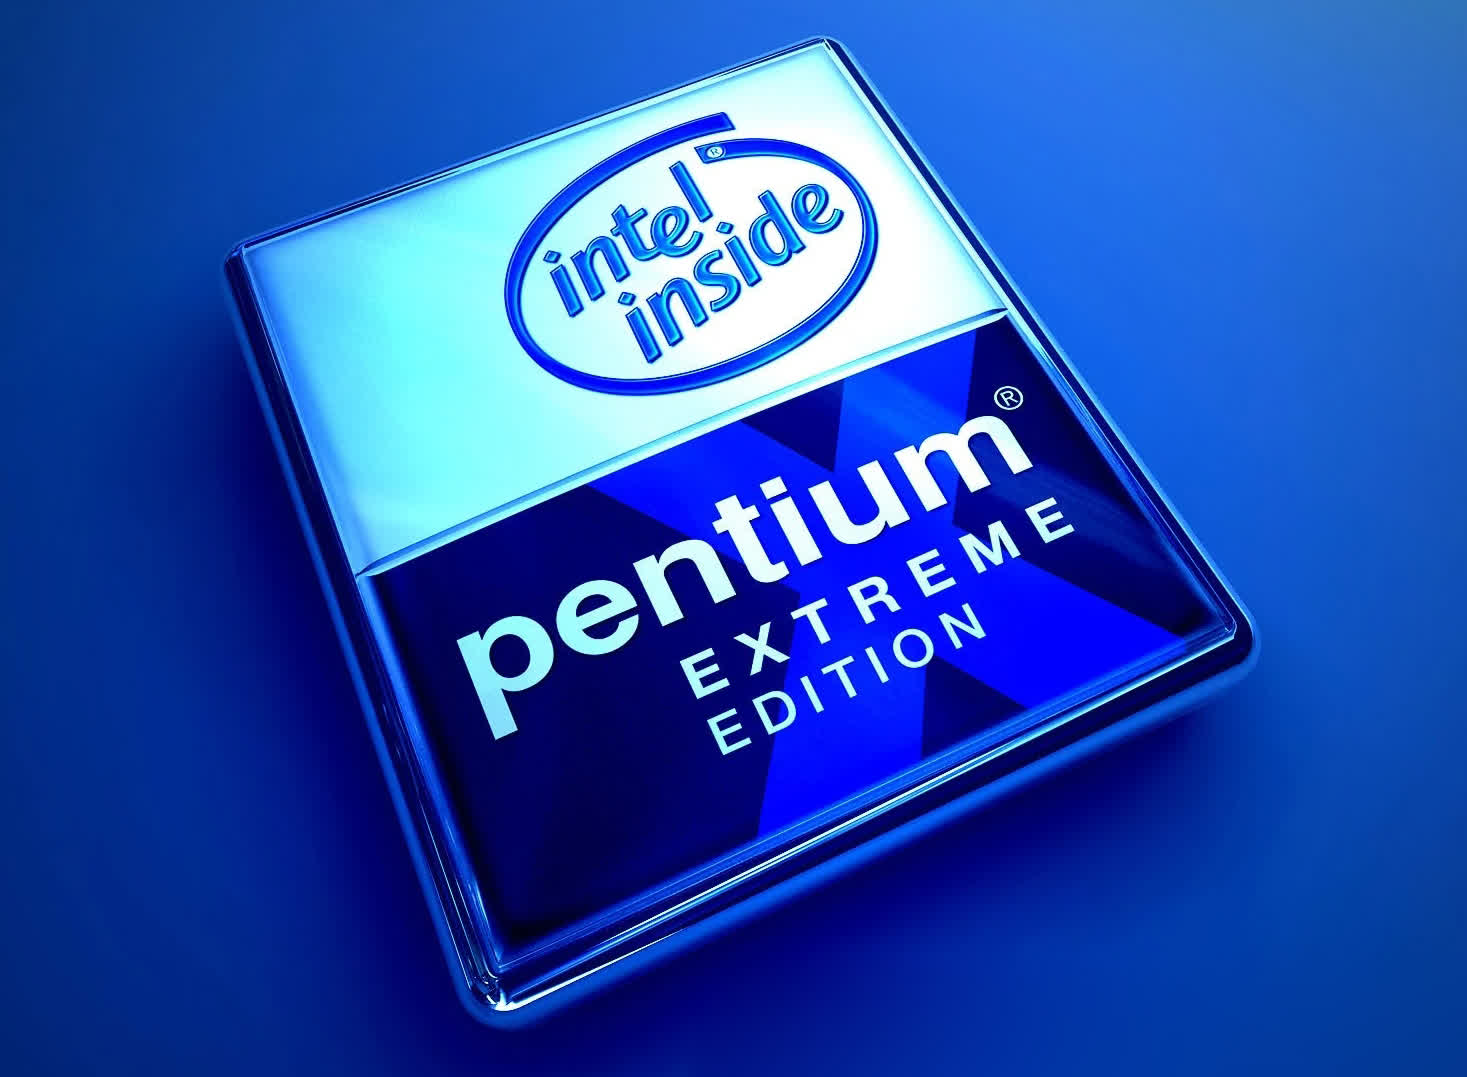 Intel will start phasing out Pentium and Celeron brands in 2023